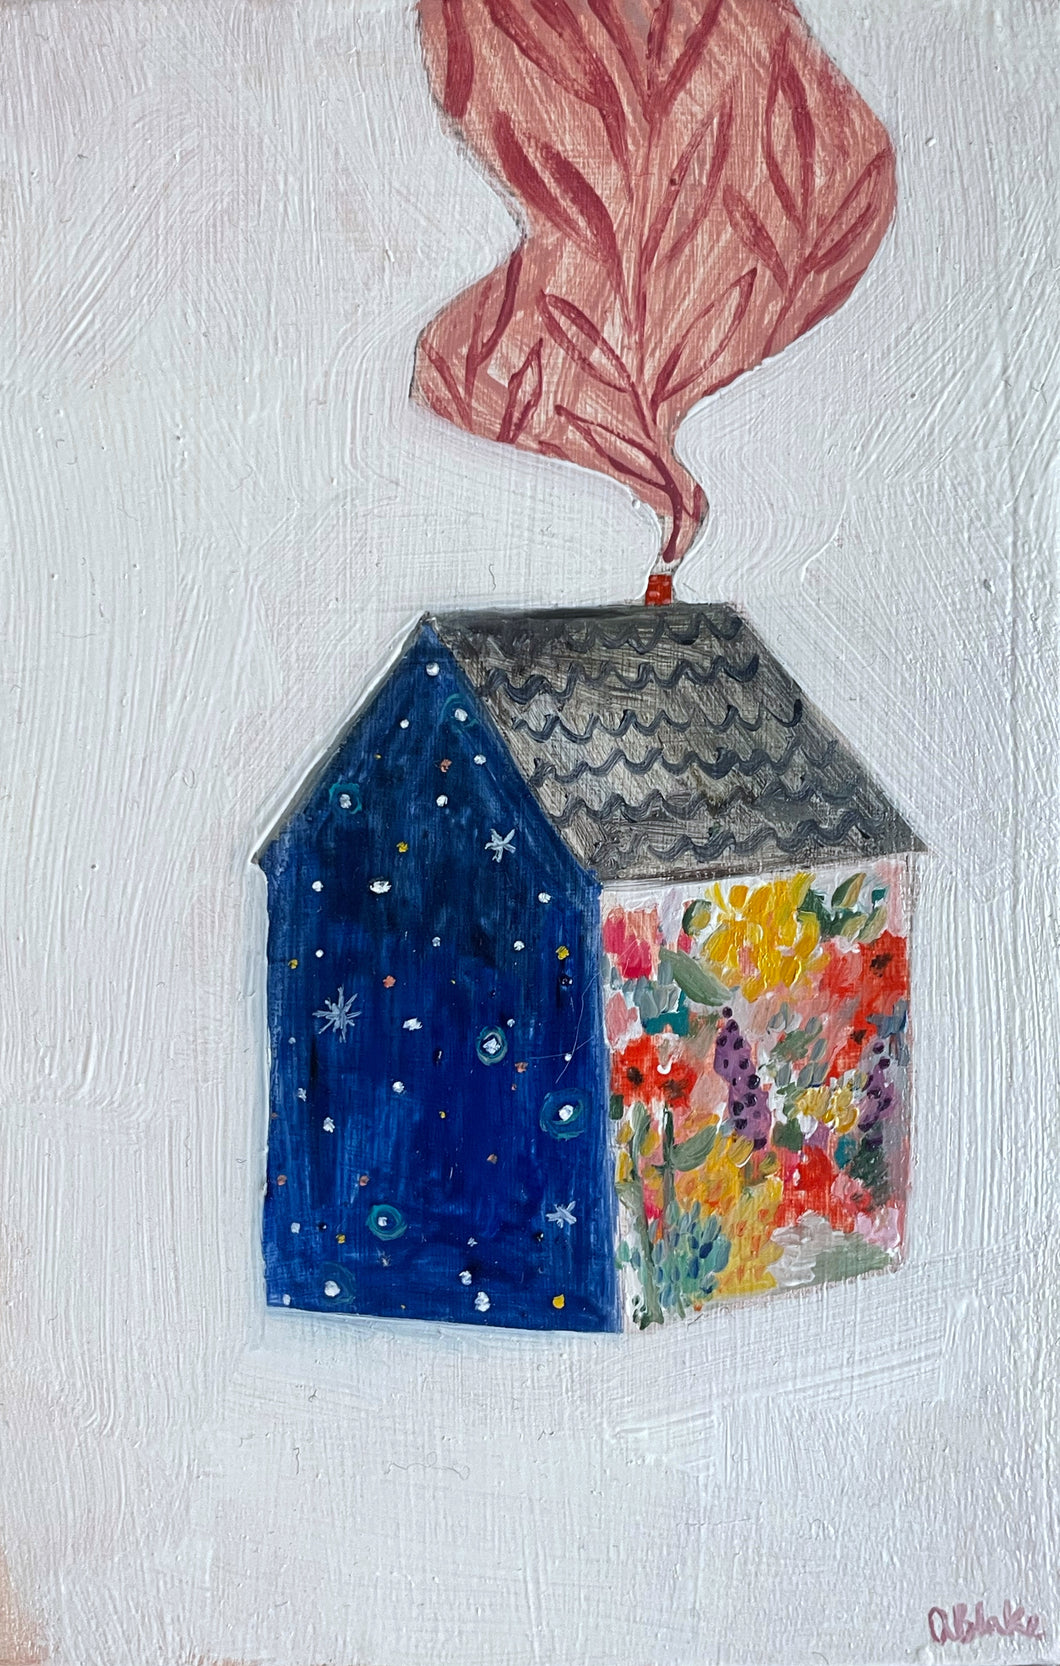 A home made of starlight and wildflowers